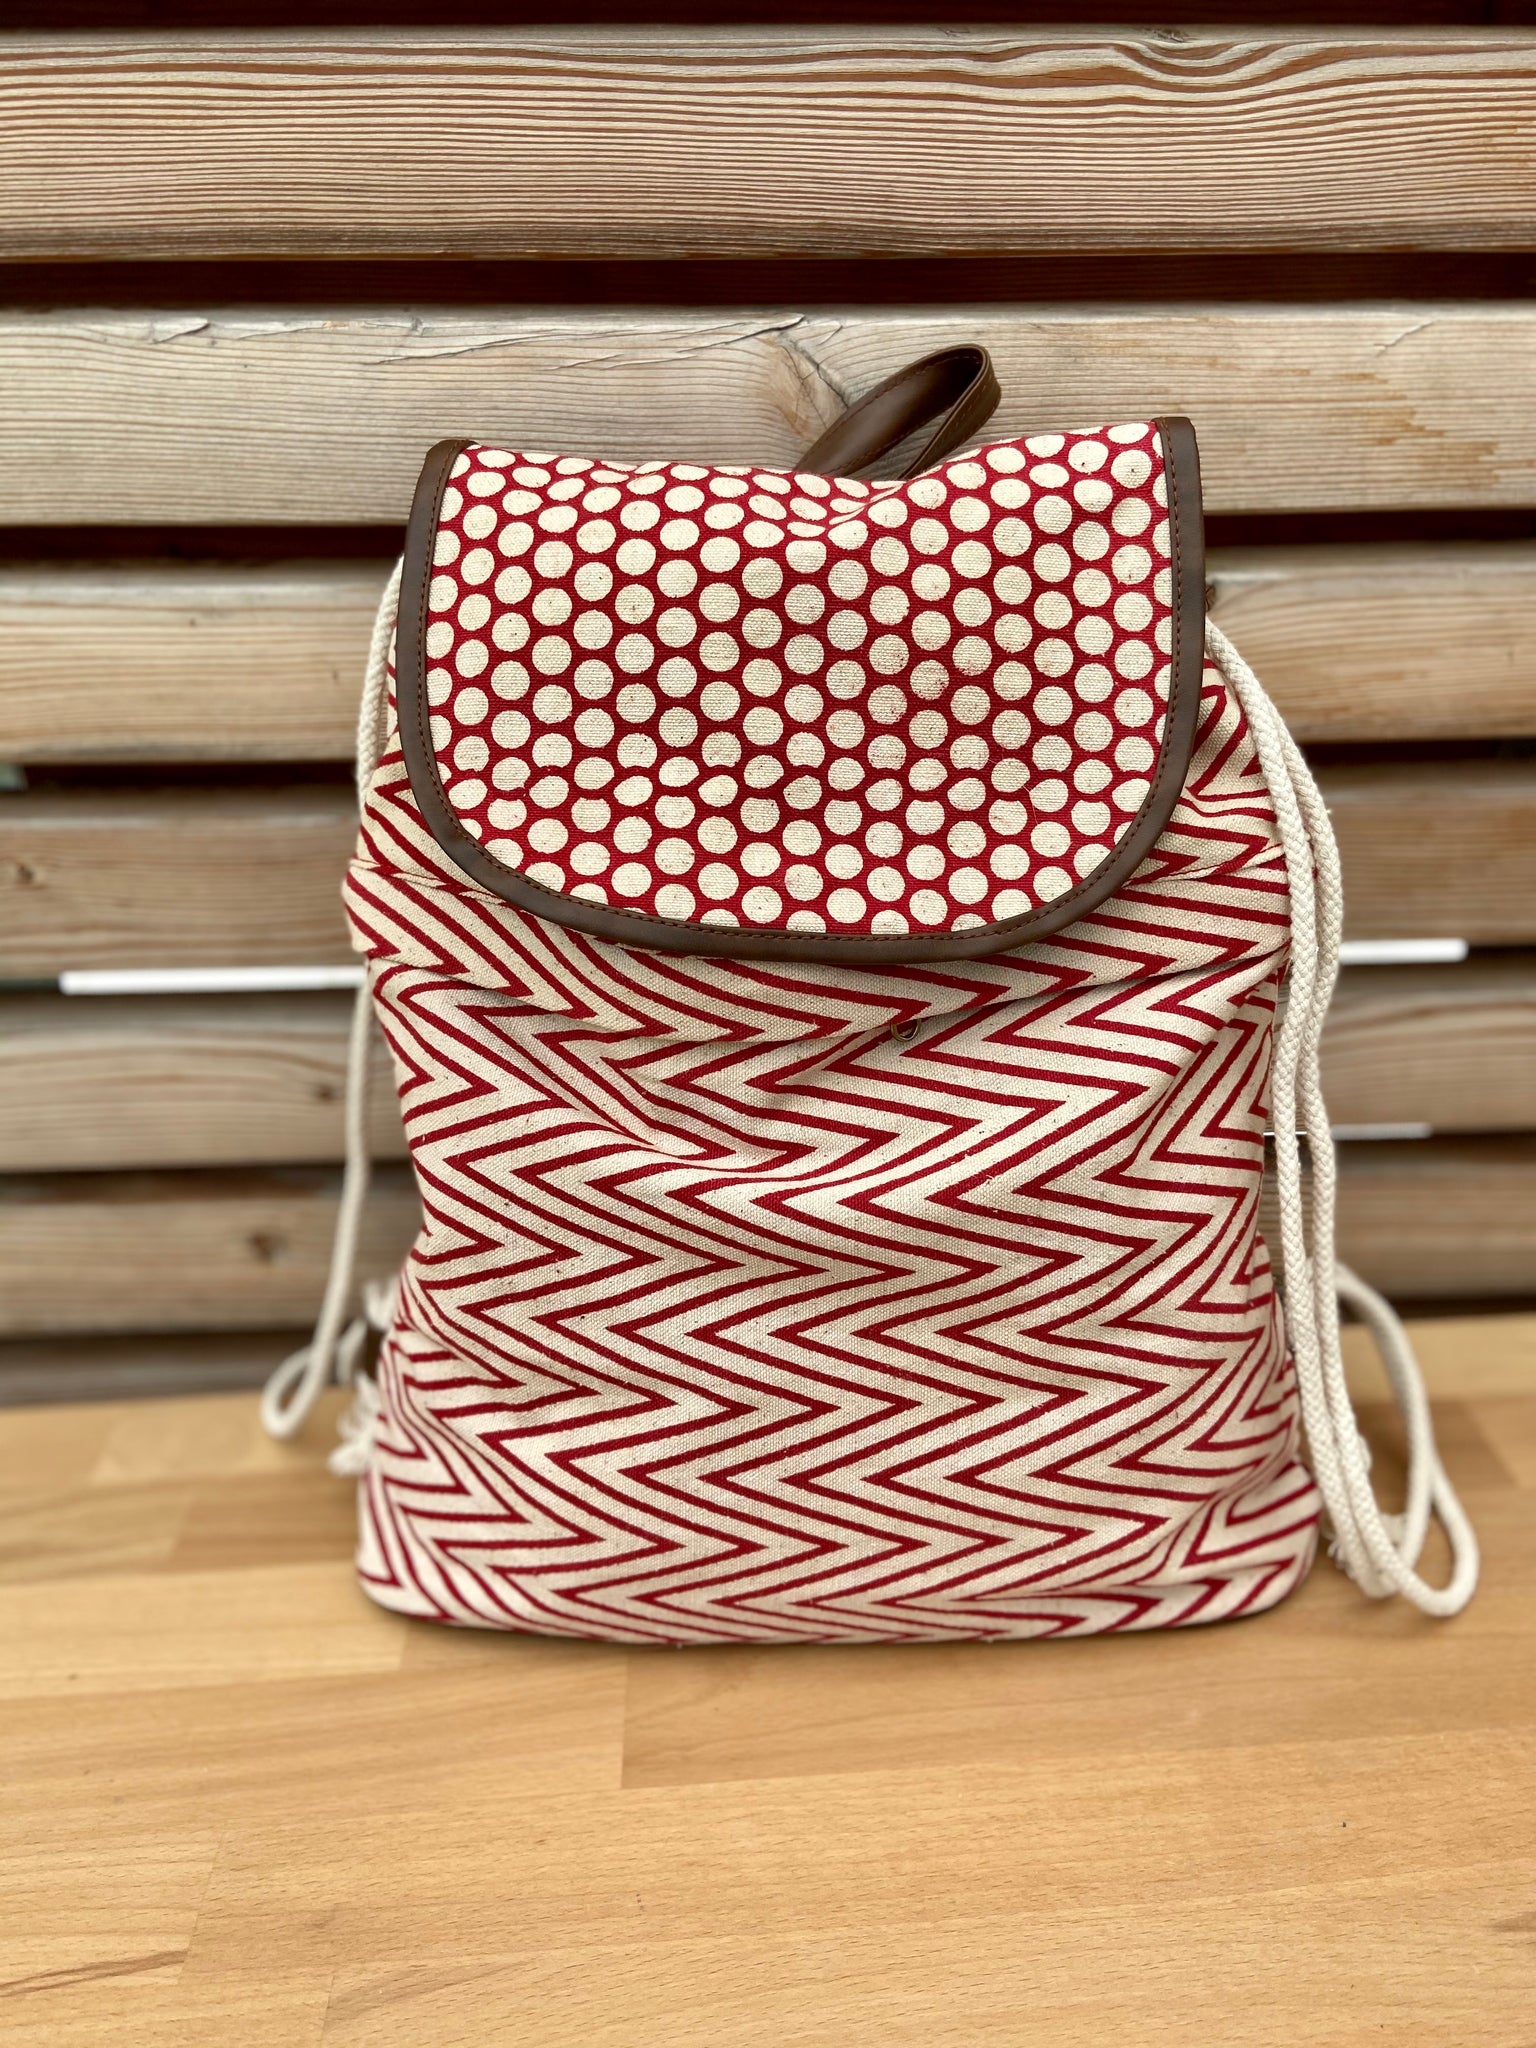 backpack slingbag polka dots and triangle pattern (++ color options)